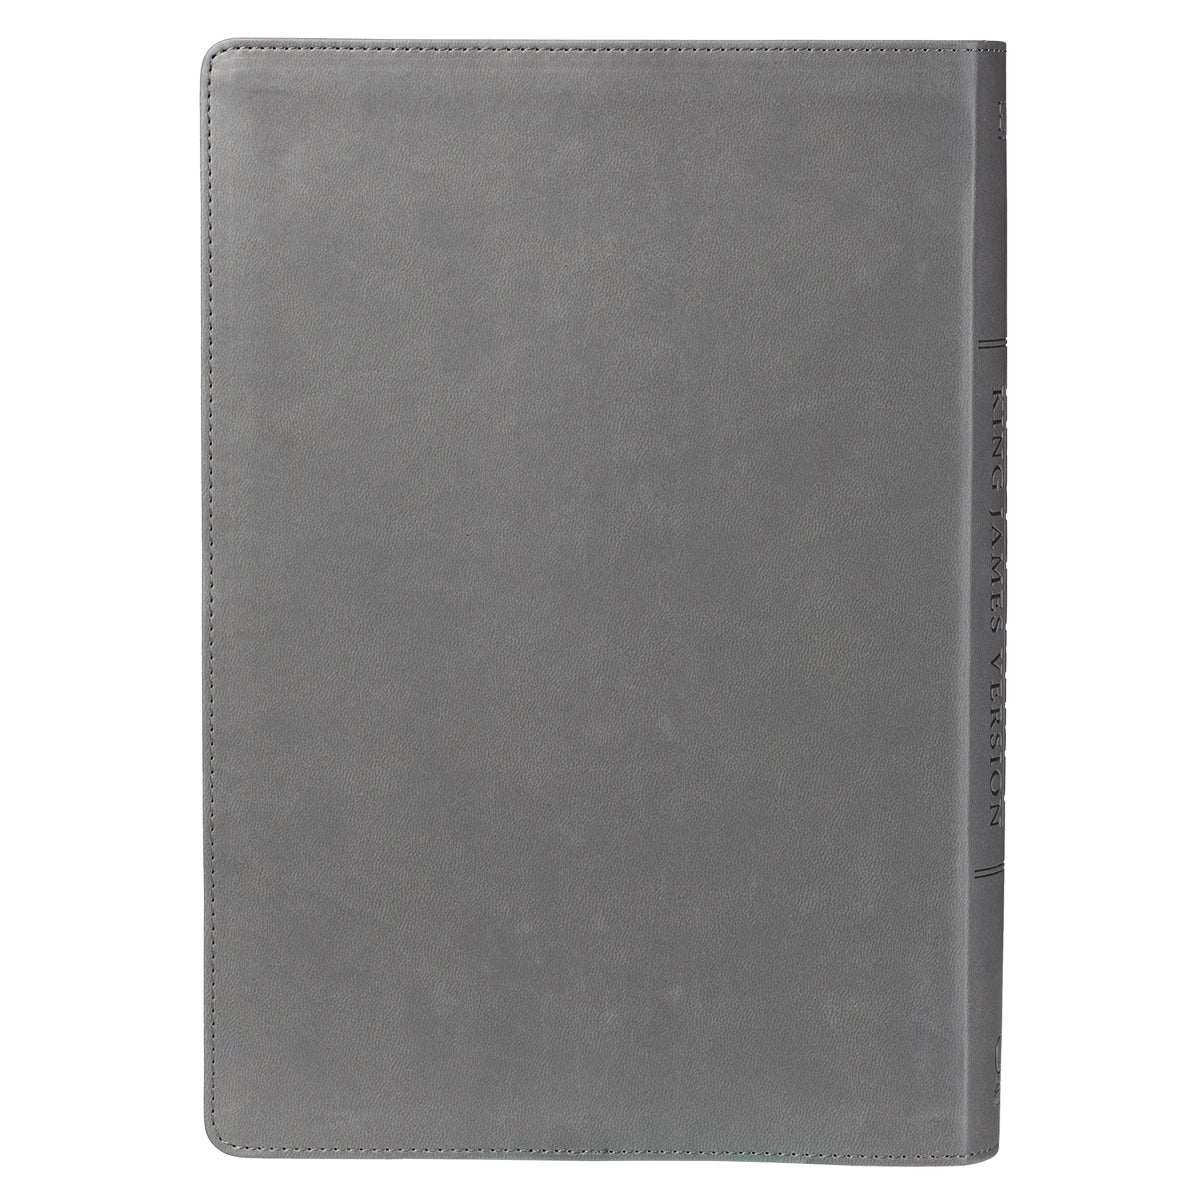 Image of KJV Super Giant Print Lux-Leather Grey/Pink other